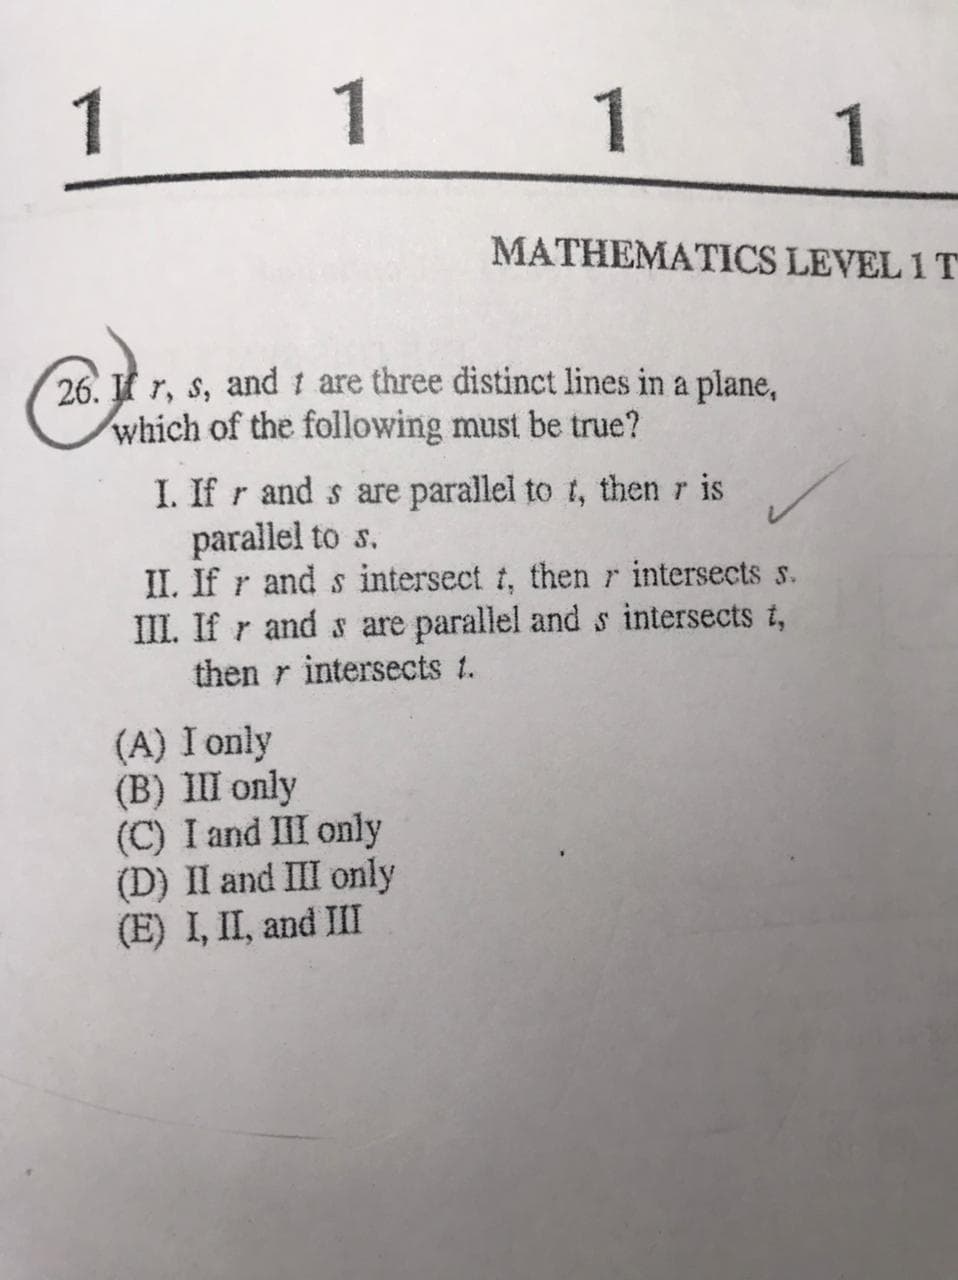 1 1 1
1
MATHEMATICS LEVEL 1 T
26. r, s, and t are three distinct lines in a plane,
which of the following must be true?
I. If r and s are parallel to t, then r is
parallel to s.
II. If r and s intersect t, thenr intersects s.
III. If r and s are parallel ands intersects t,
then r intersects t.
(A) I only
(B) III only
(C) I and III only
(D) II and III only
(E) I, II, and III
